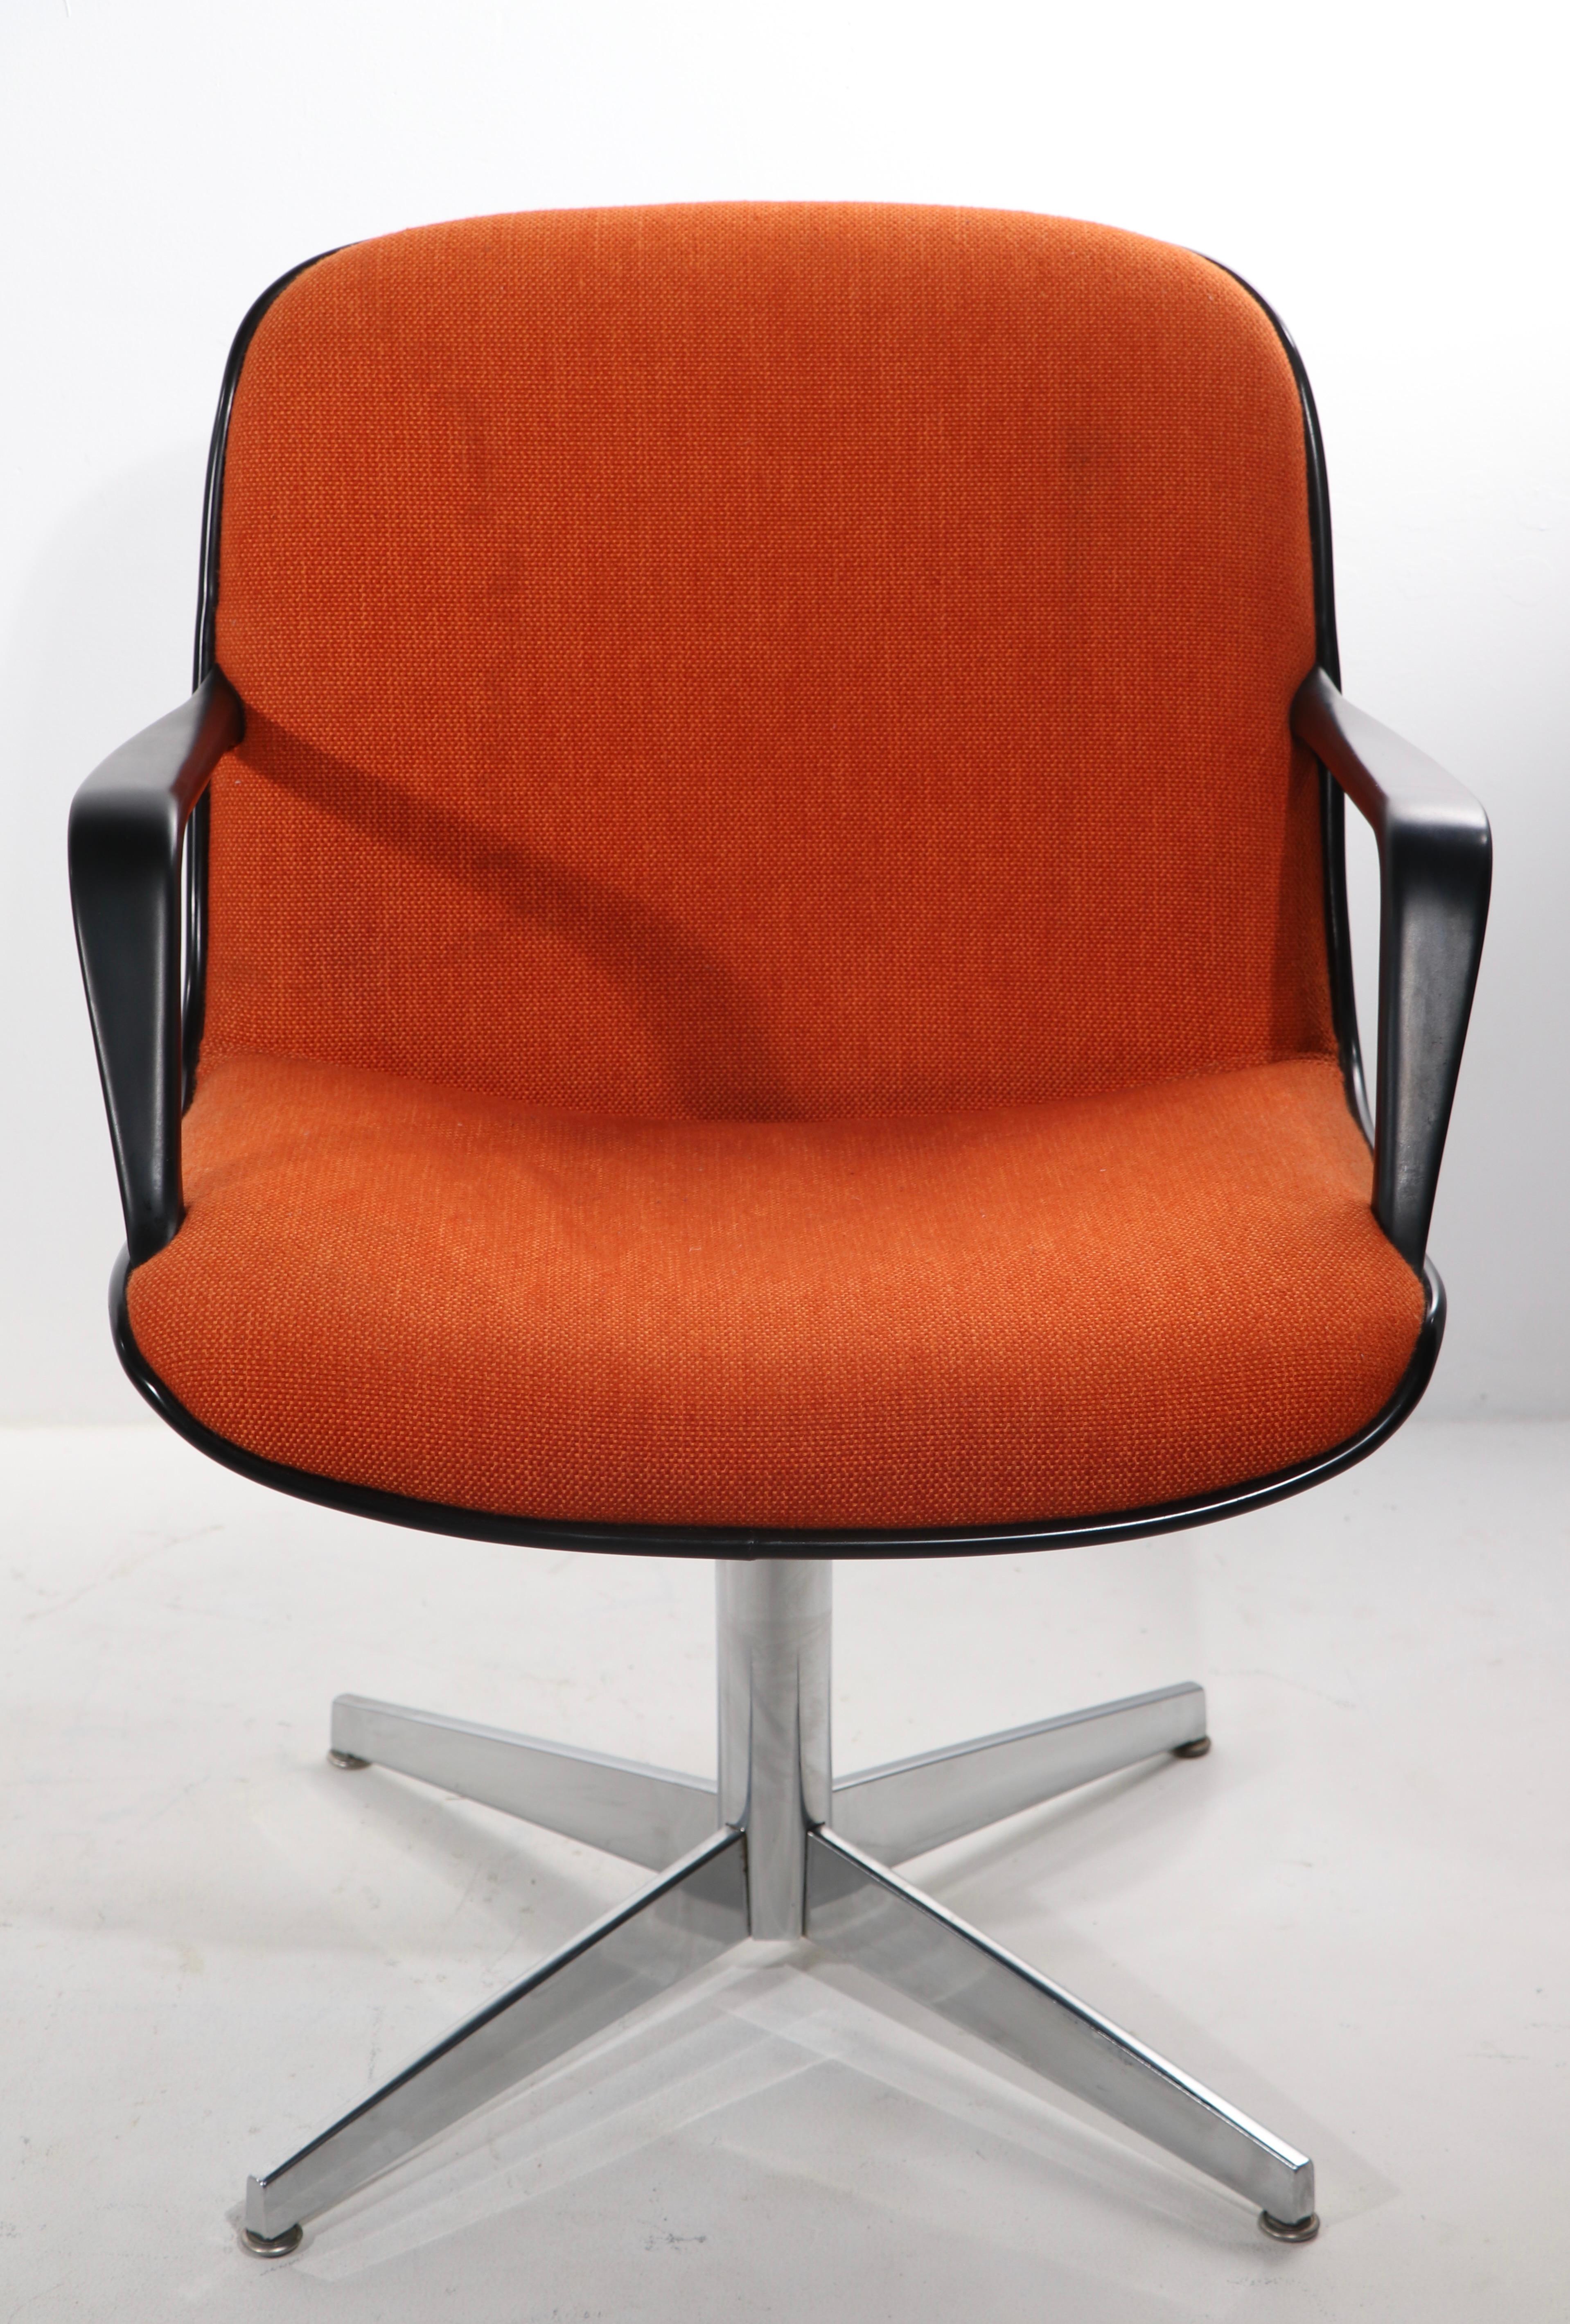 Nice lot of nine Steelcase armchairs, having a continuous test and back of orange tweed upholstery, dark gray plastic shell exterior, on bright chrome pedestal and four star base. The chairs are in very good, original condition, showing only light